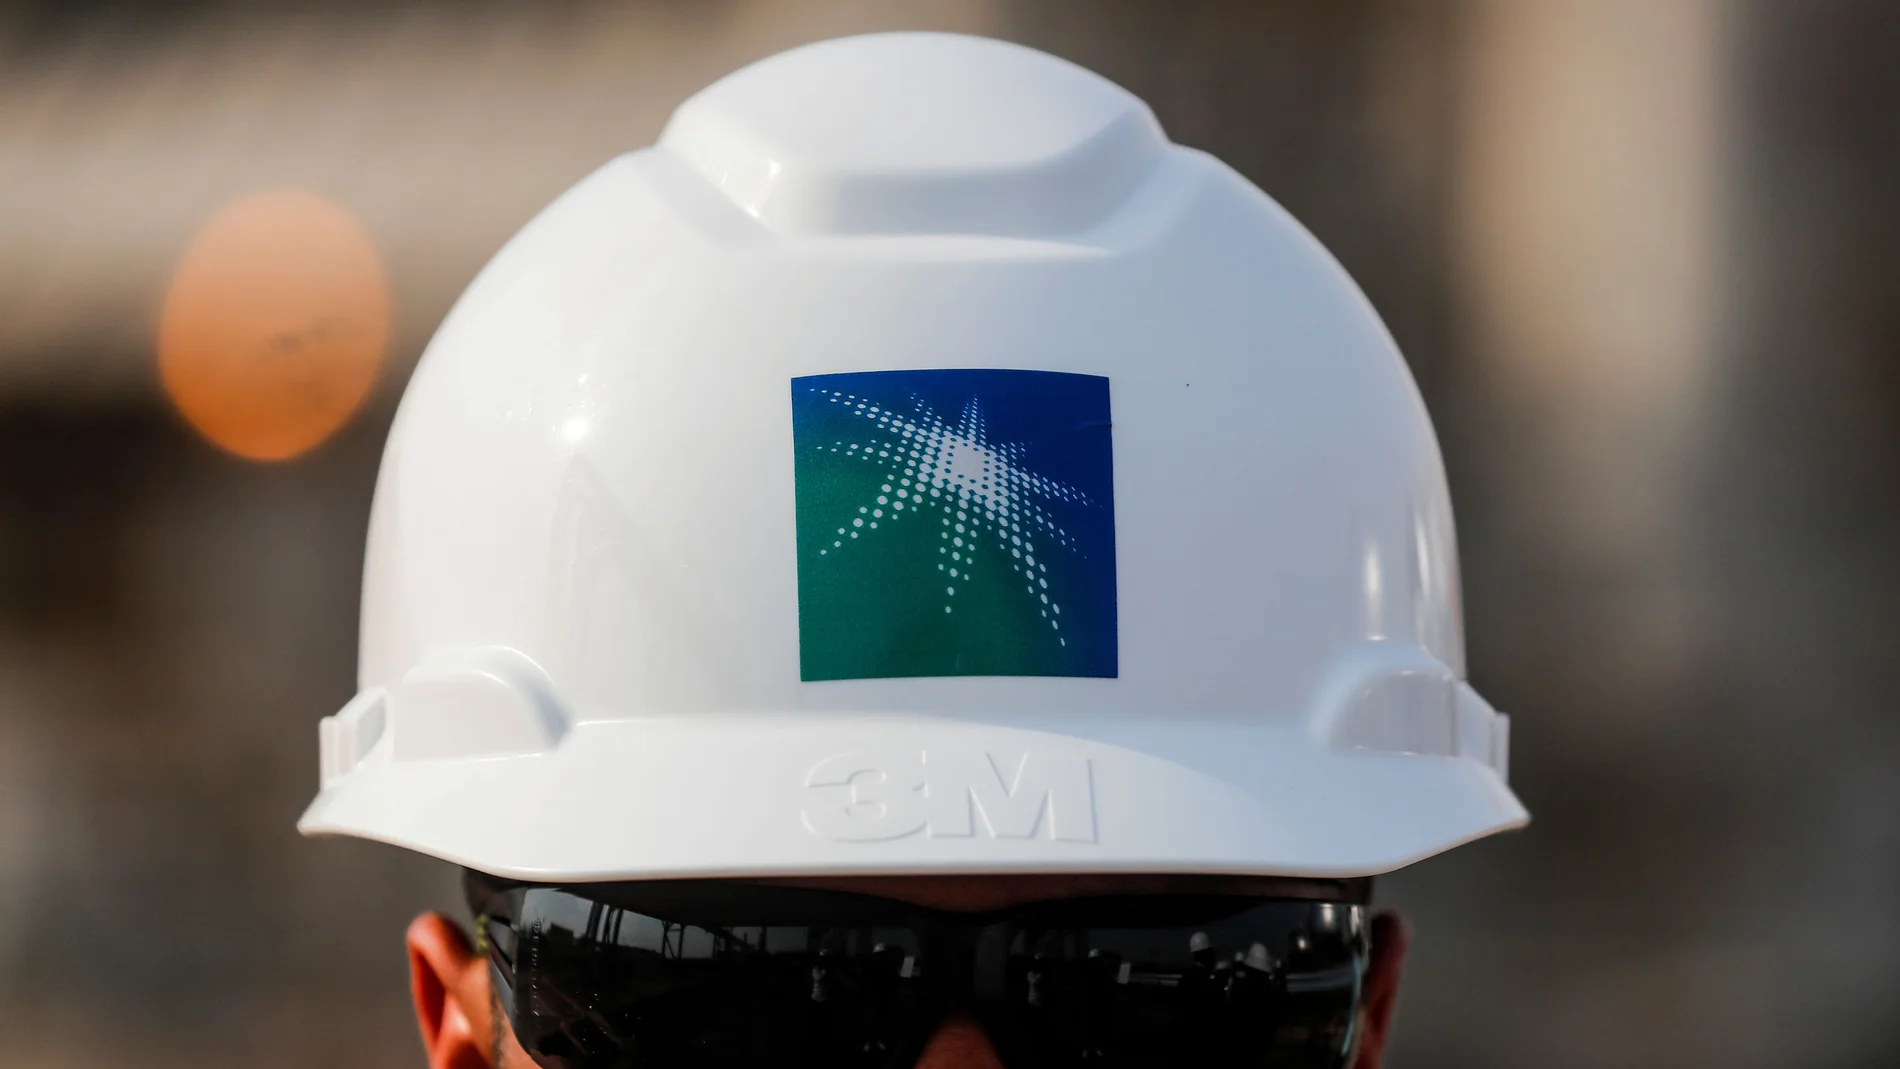 FILE PHOTO: An employee in a branded helmet is pictured at Saudi Aramco oil facility in Abqaiq